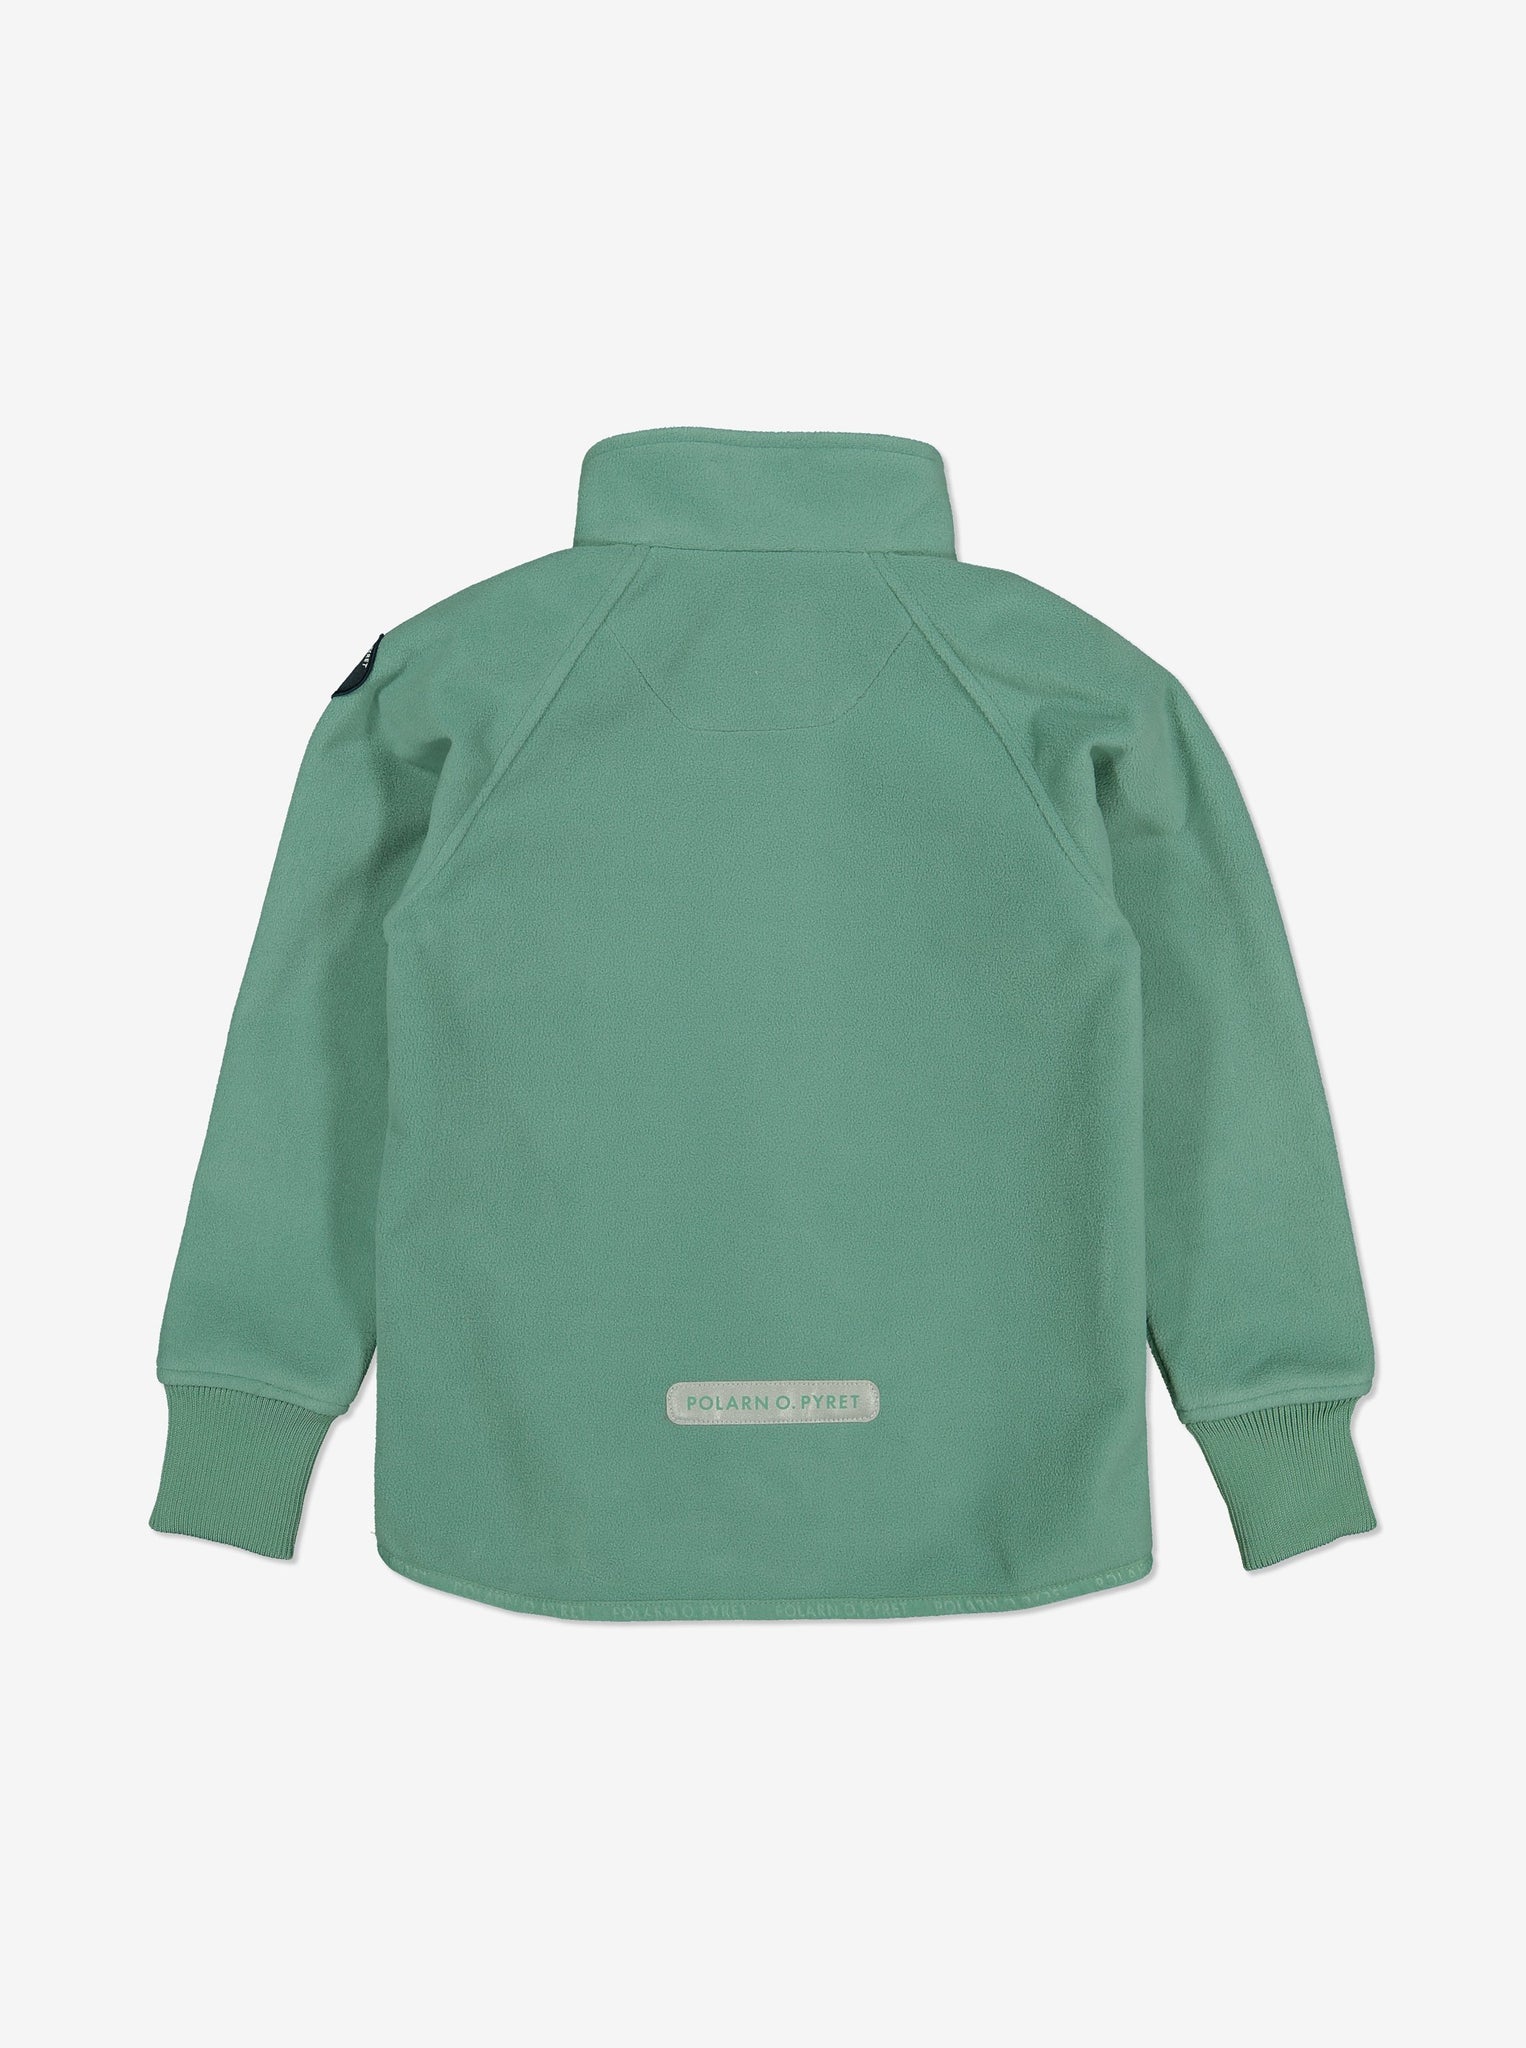 Back view of a kids waterproof fleece jacket in green, with fit cuffs and logo patch at the back, made of breathable fabric.